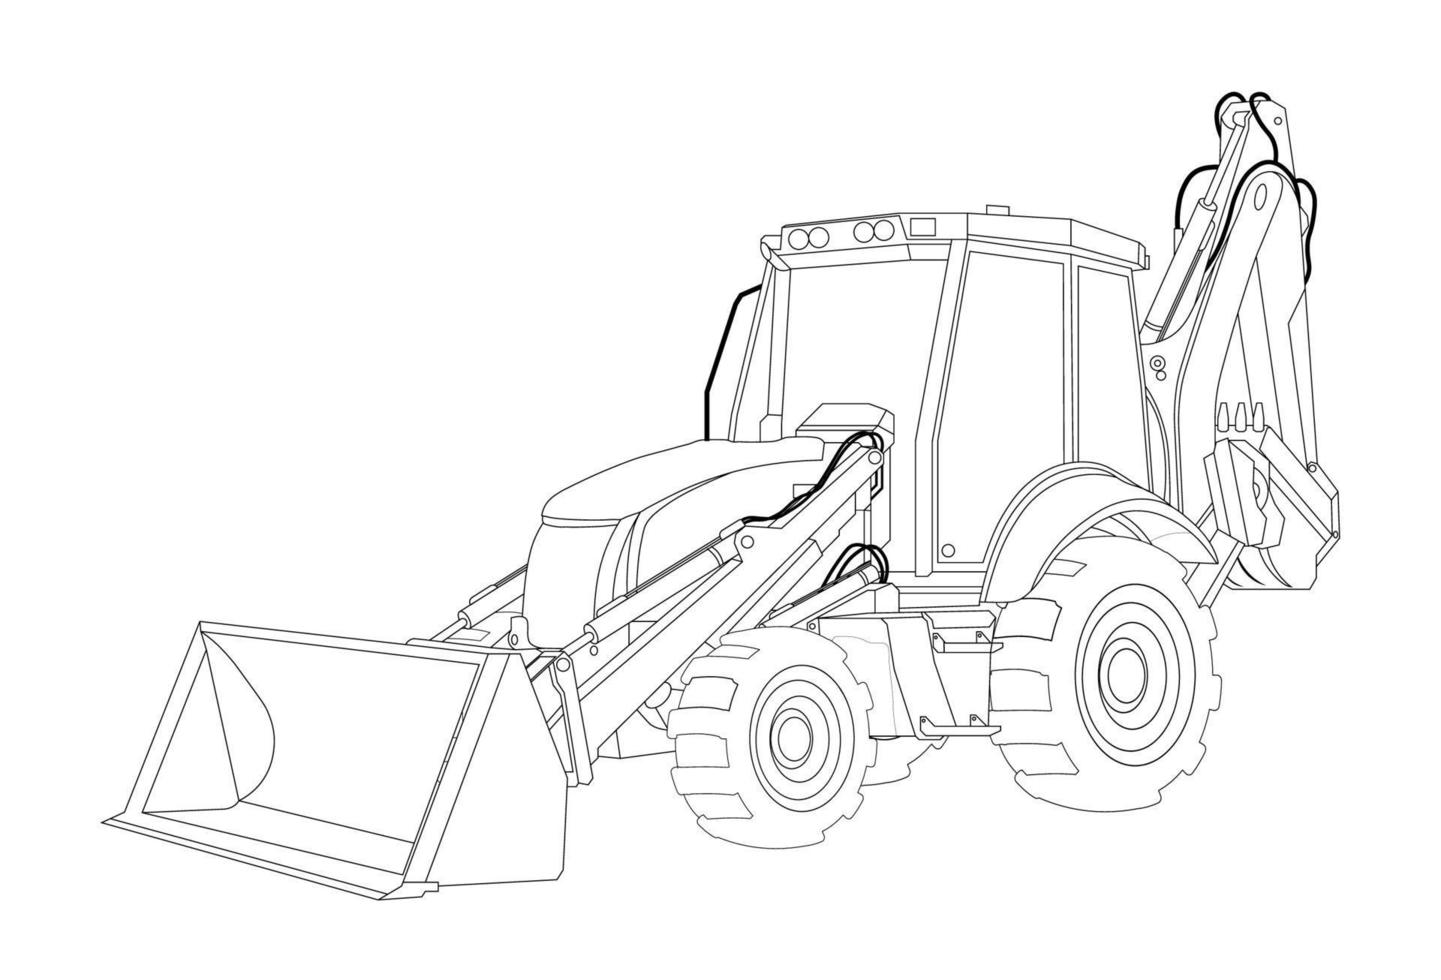 Children linear drawing for coloring. Construction equipment tractor in linear pattern. Industrial machinery and equipment. Isolated vector on white